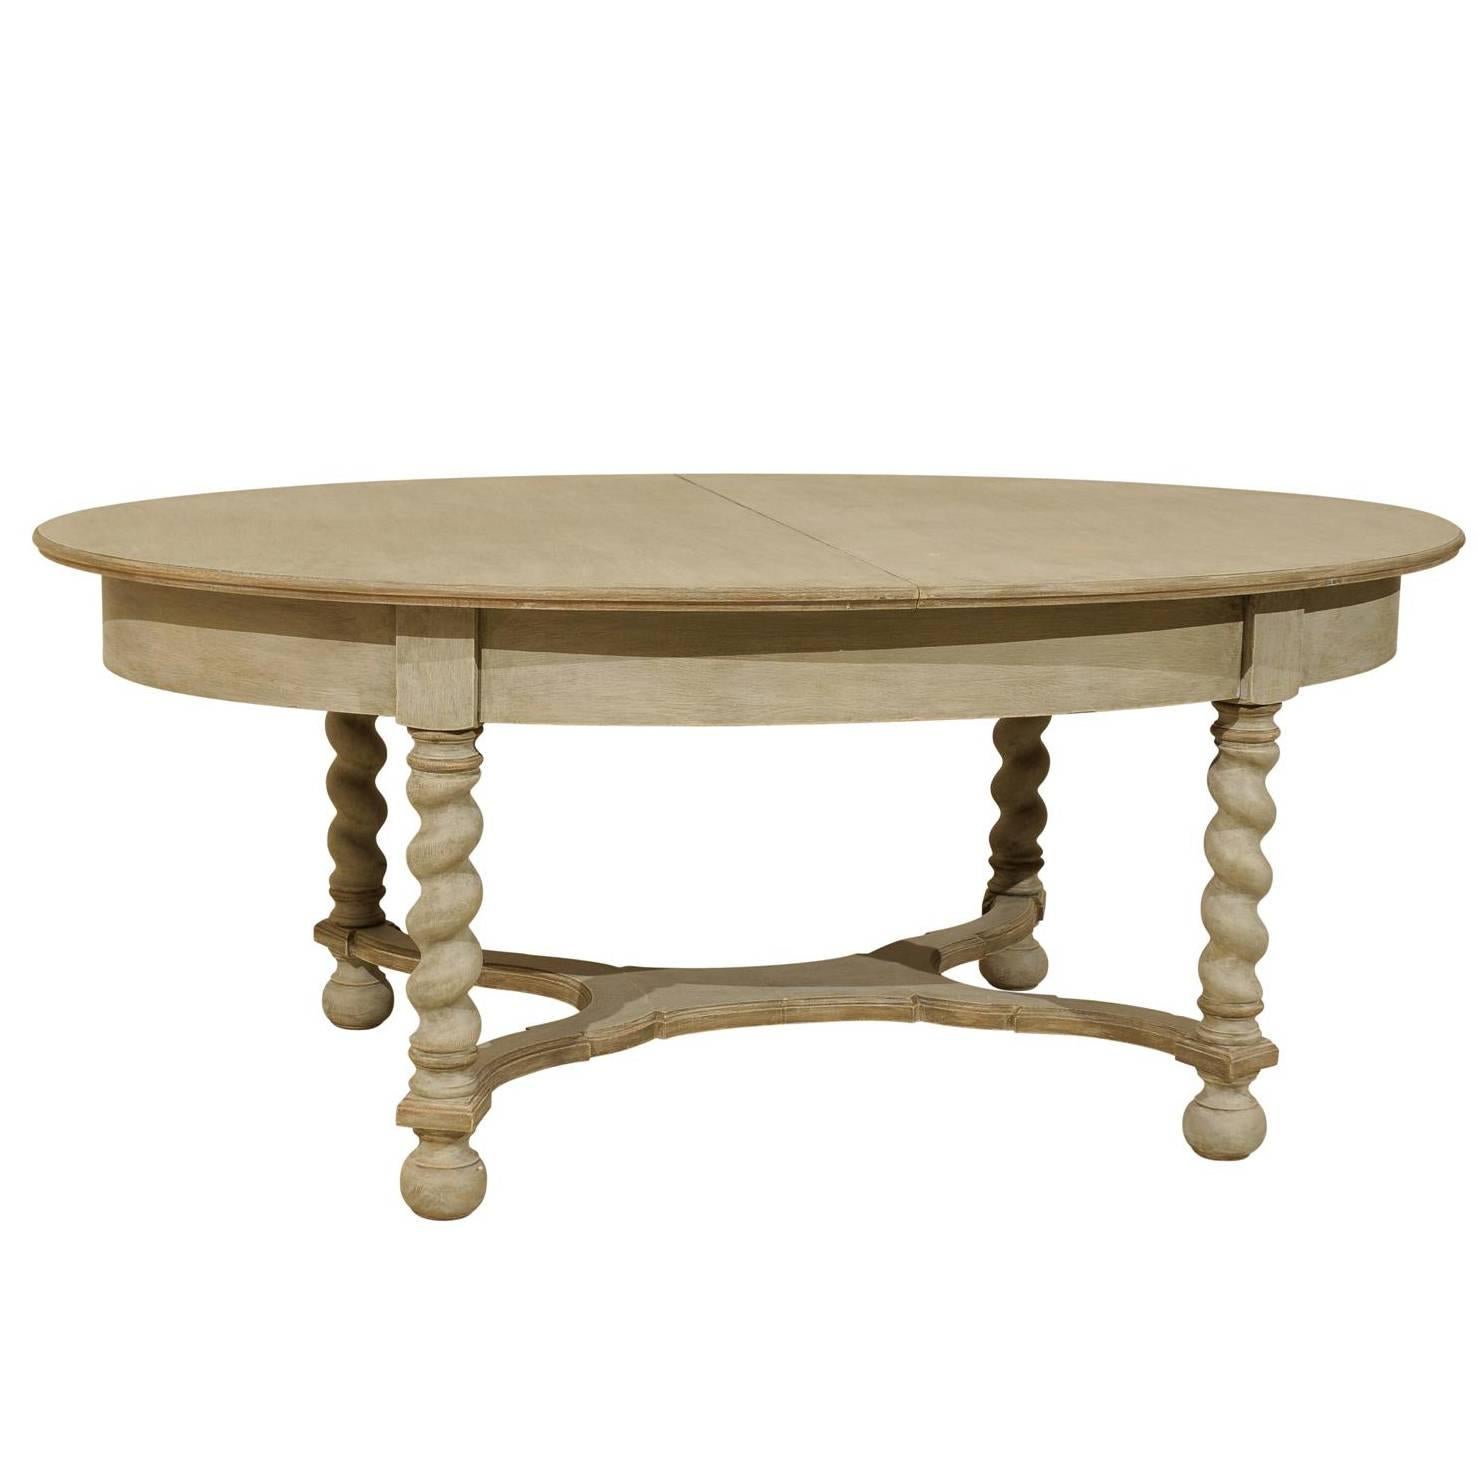 Swedish Baroque Style Oval Table from the Mid-20th Century